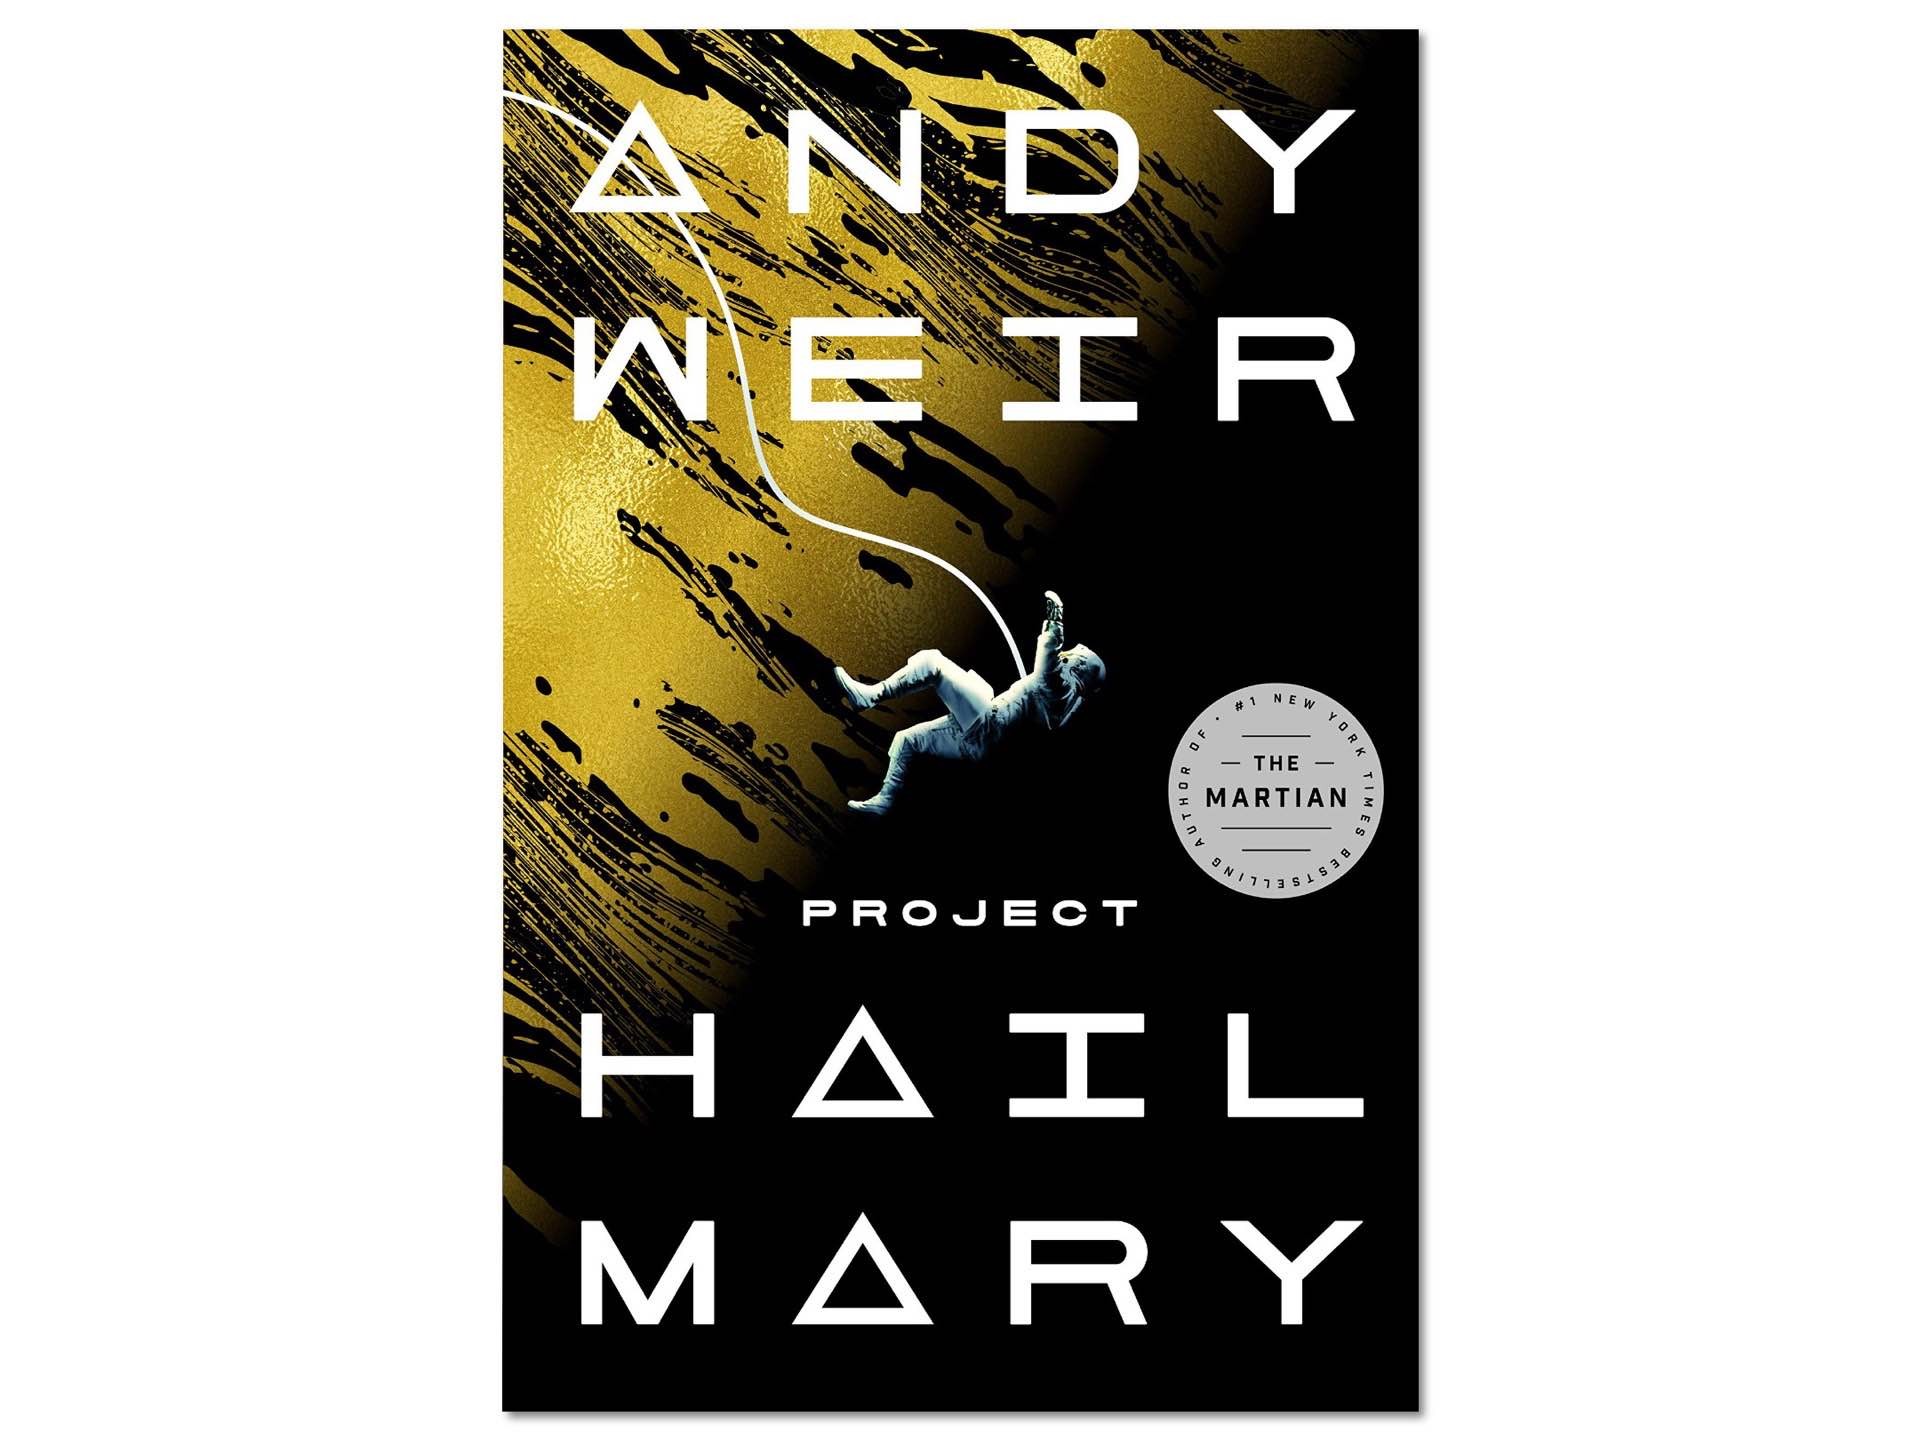 Project Hail Mary by Andy Weir. ($15 hardcover)